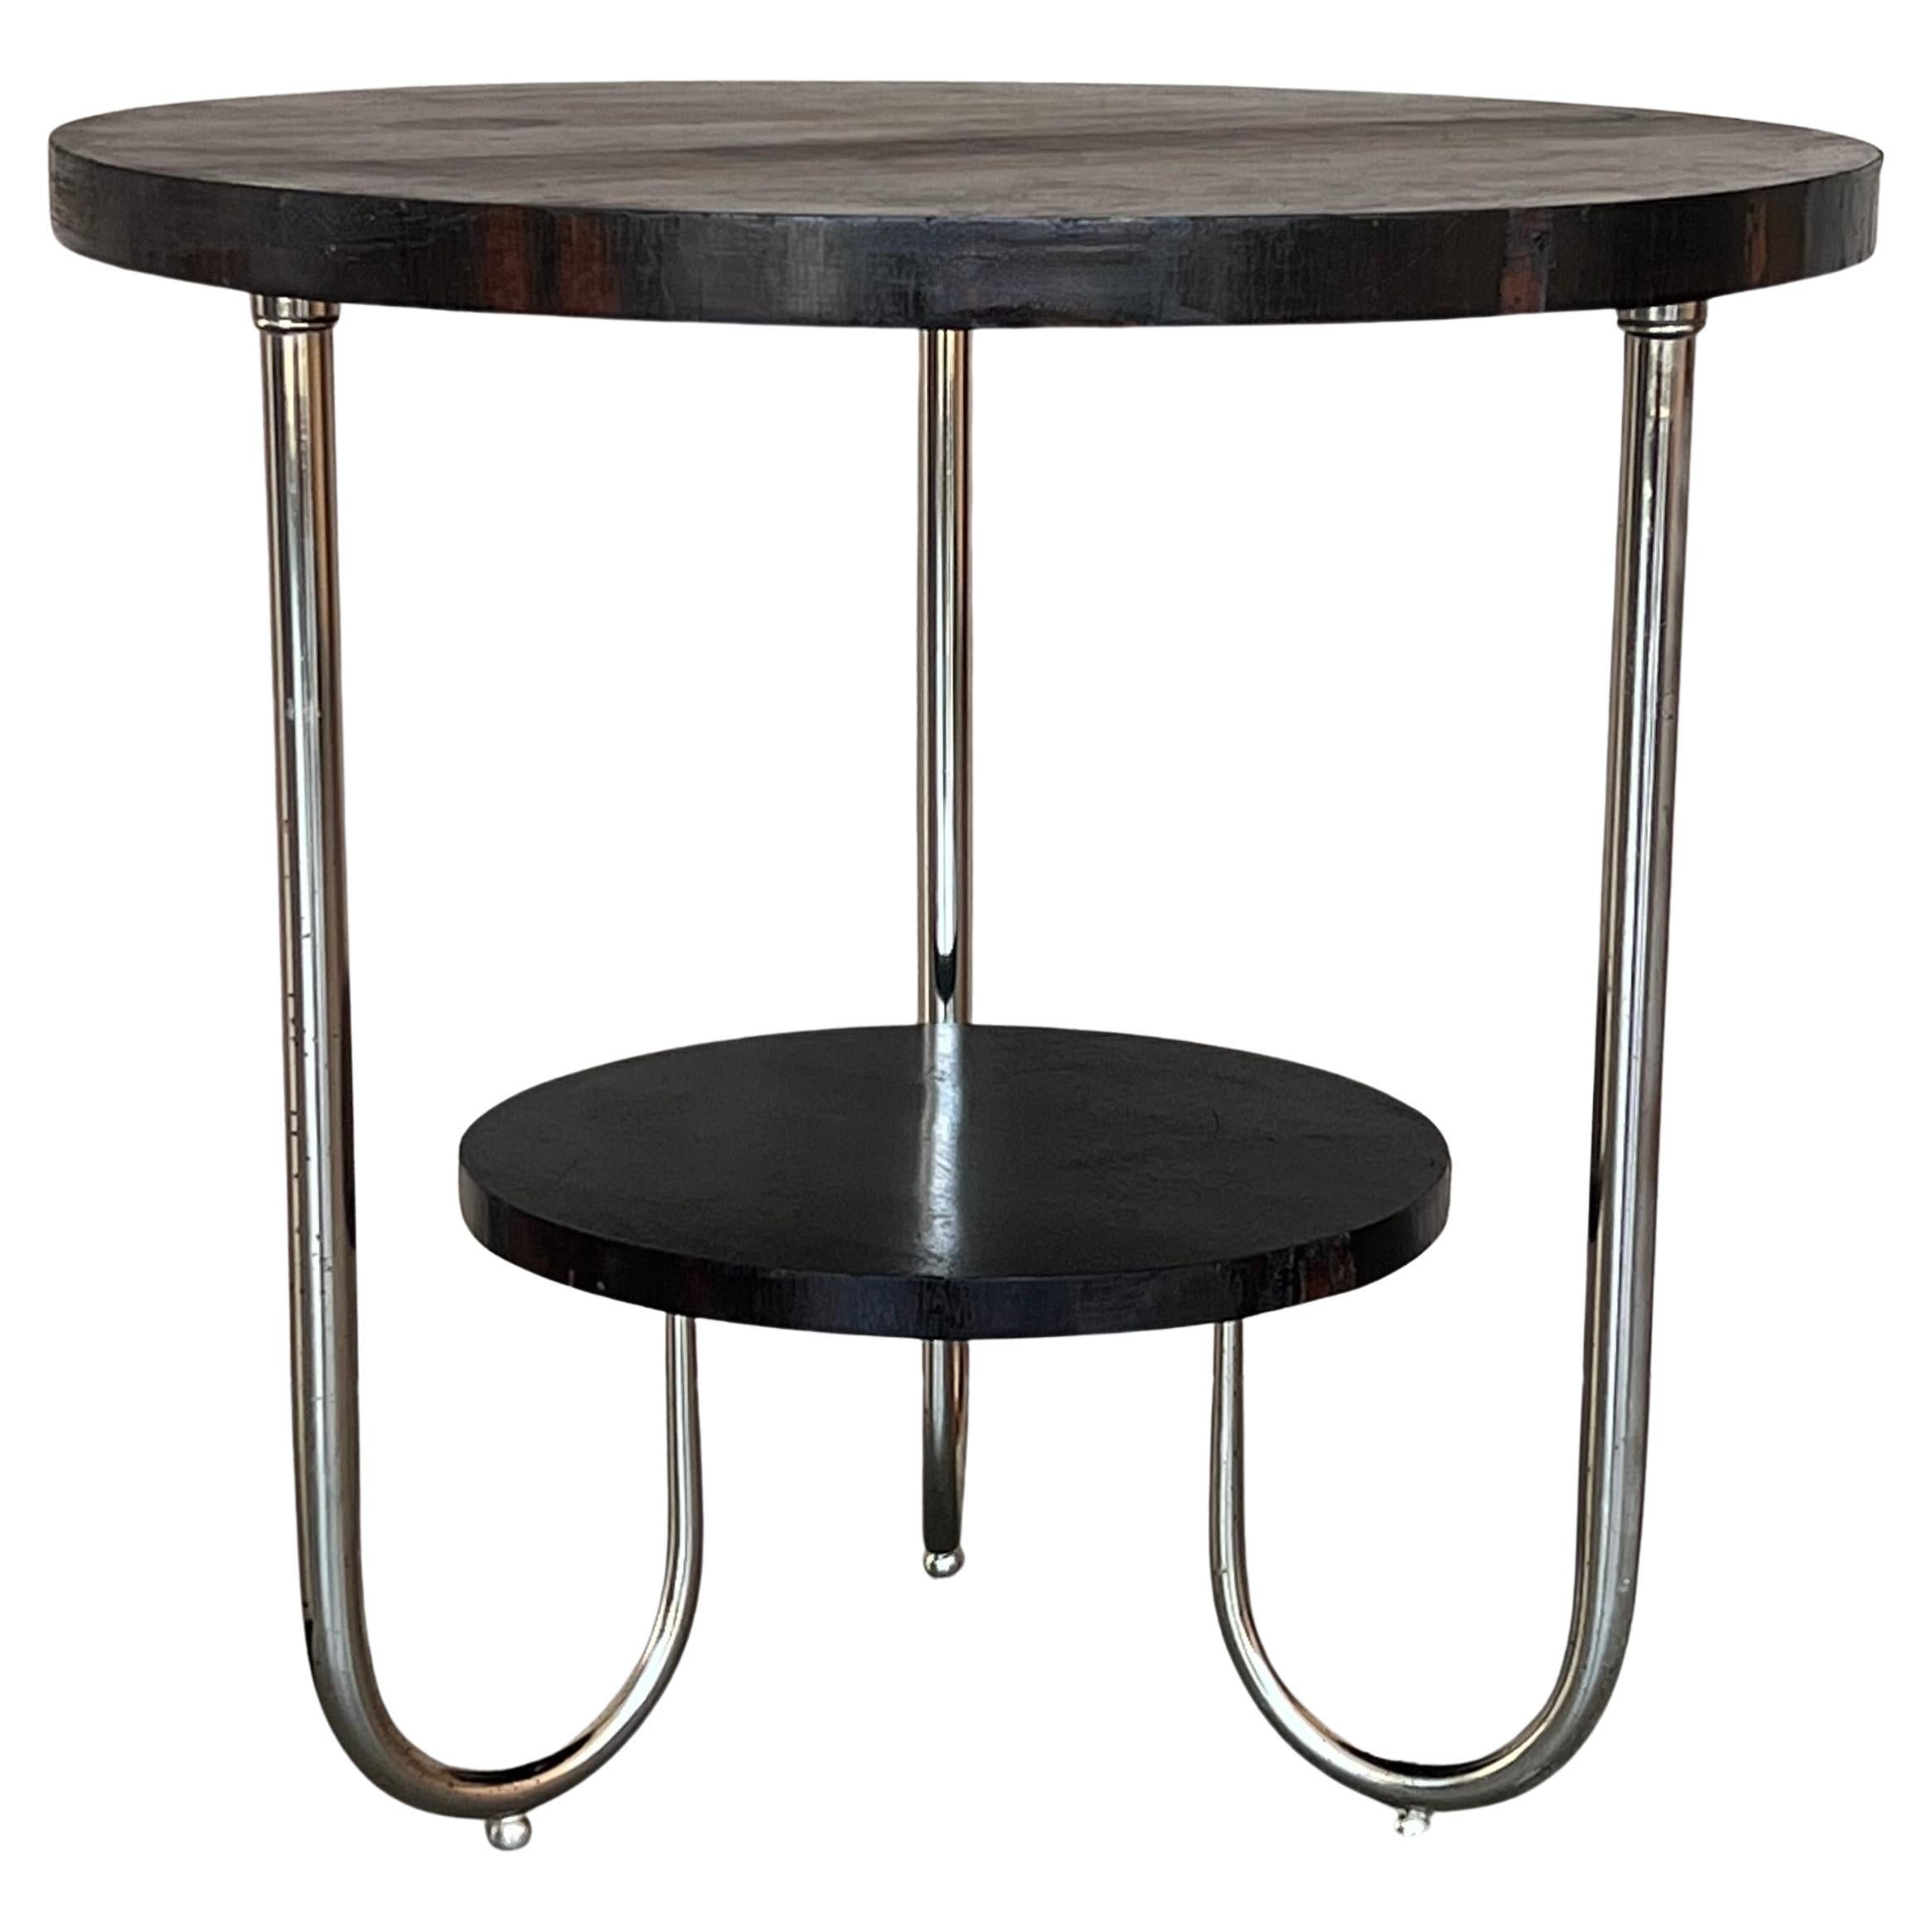 A Fine French Art Deco Mahogany and Chrome Two-Tiered Gueridon Side Table For Sale